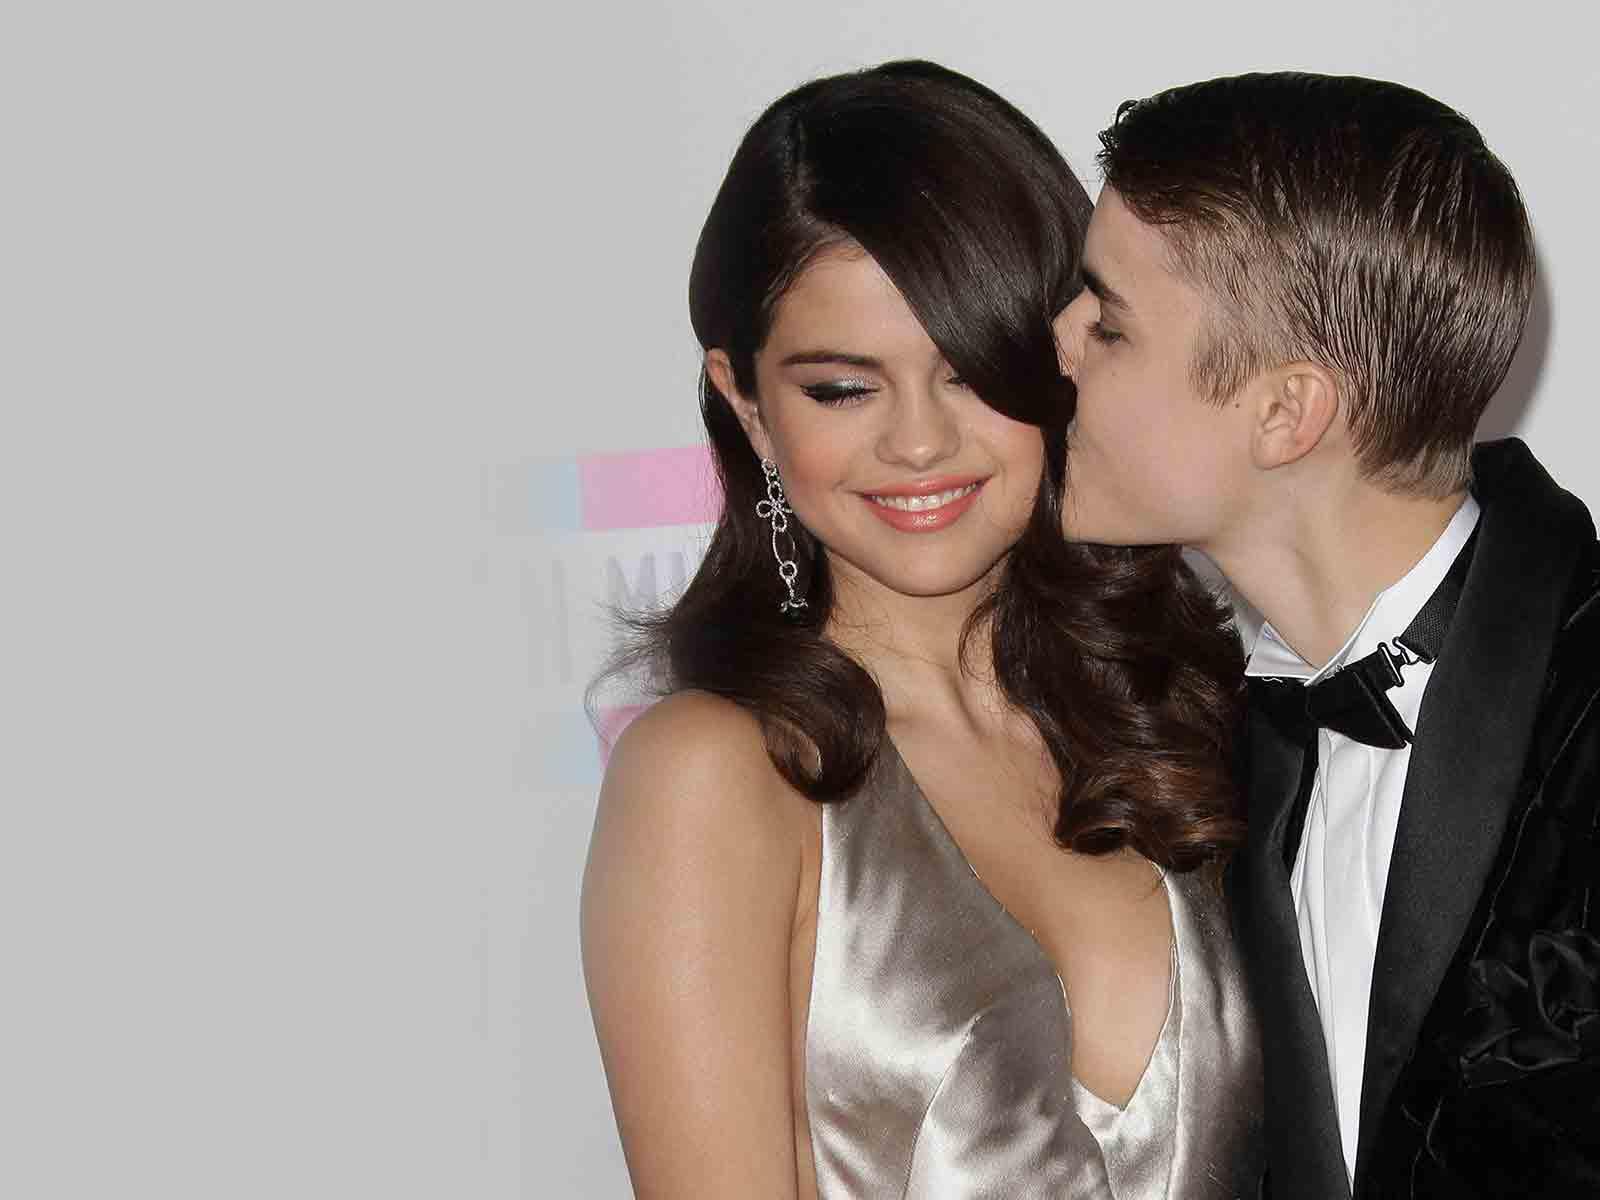 Justin Bieber Reconnected With Selena Gomez During Life-Saving Kidney Transplant